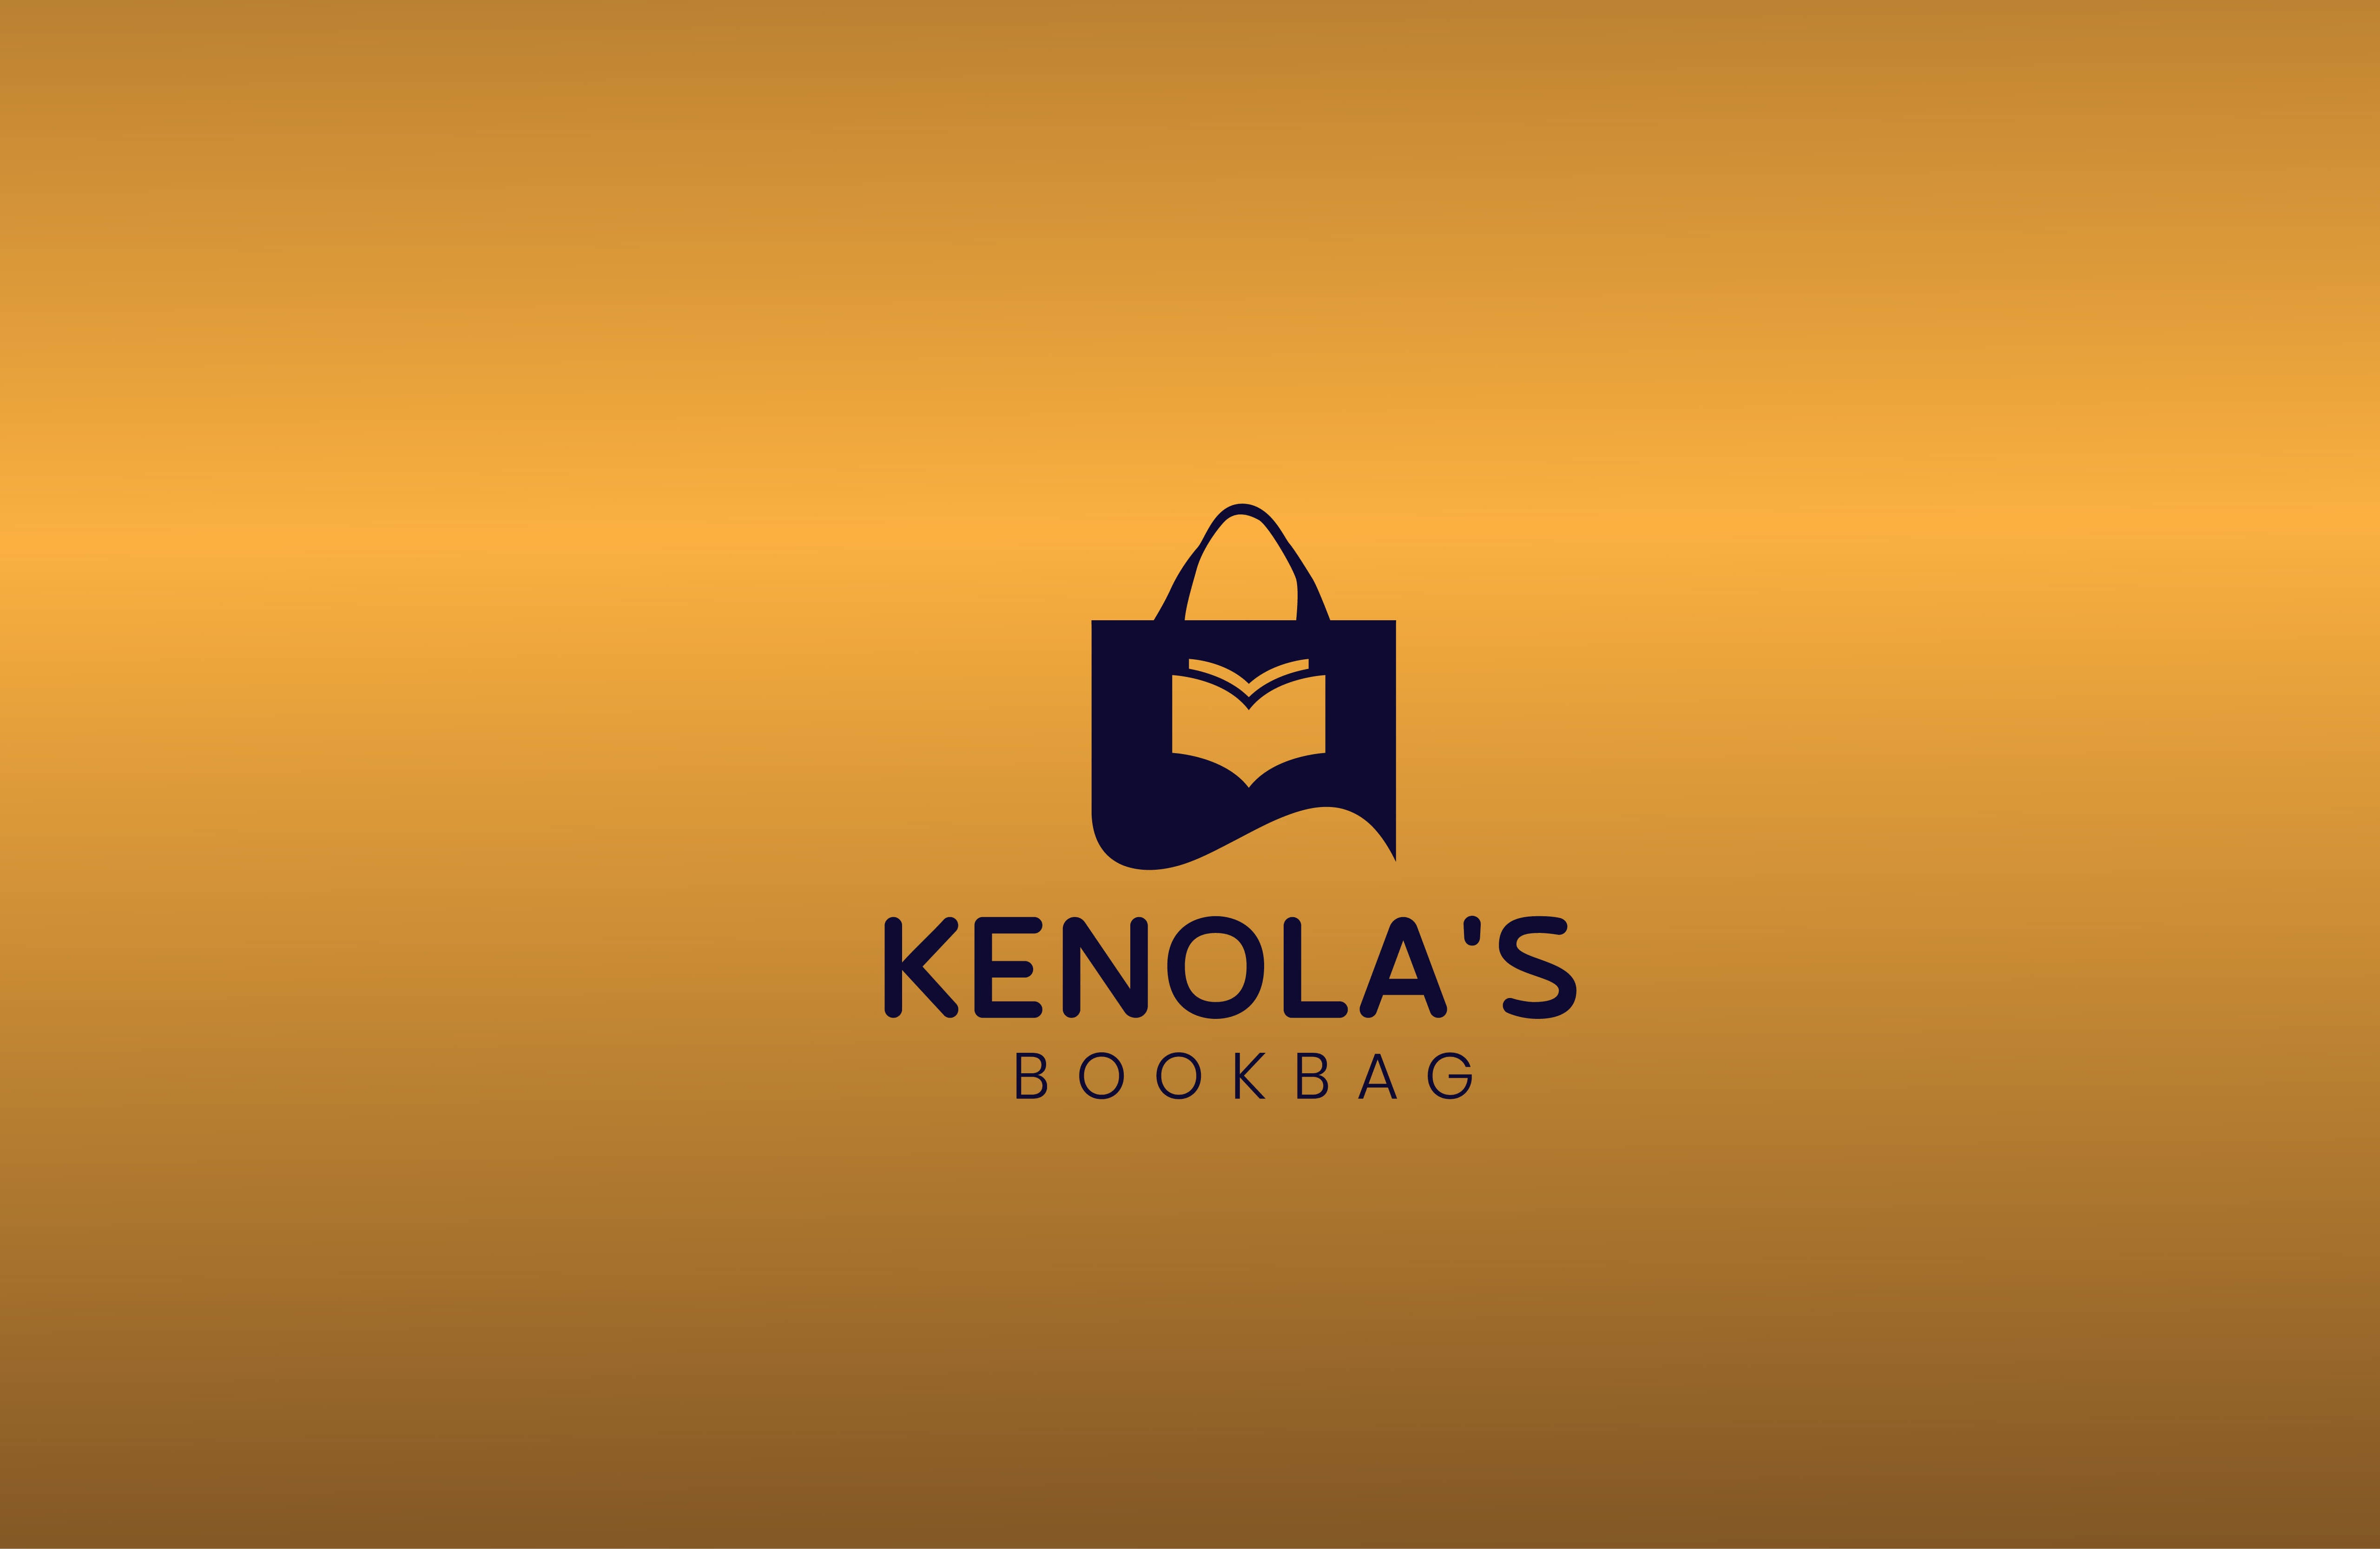 Kenola's Bookbag logo: a gold background with a blue totebag centered.  An open book is on the bag